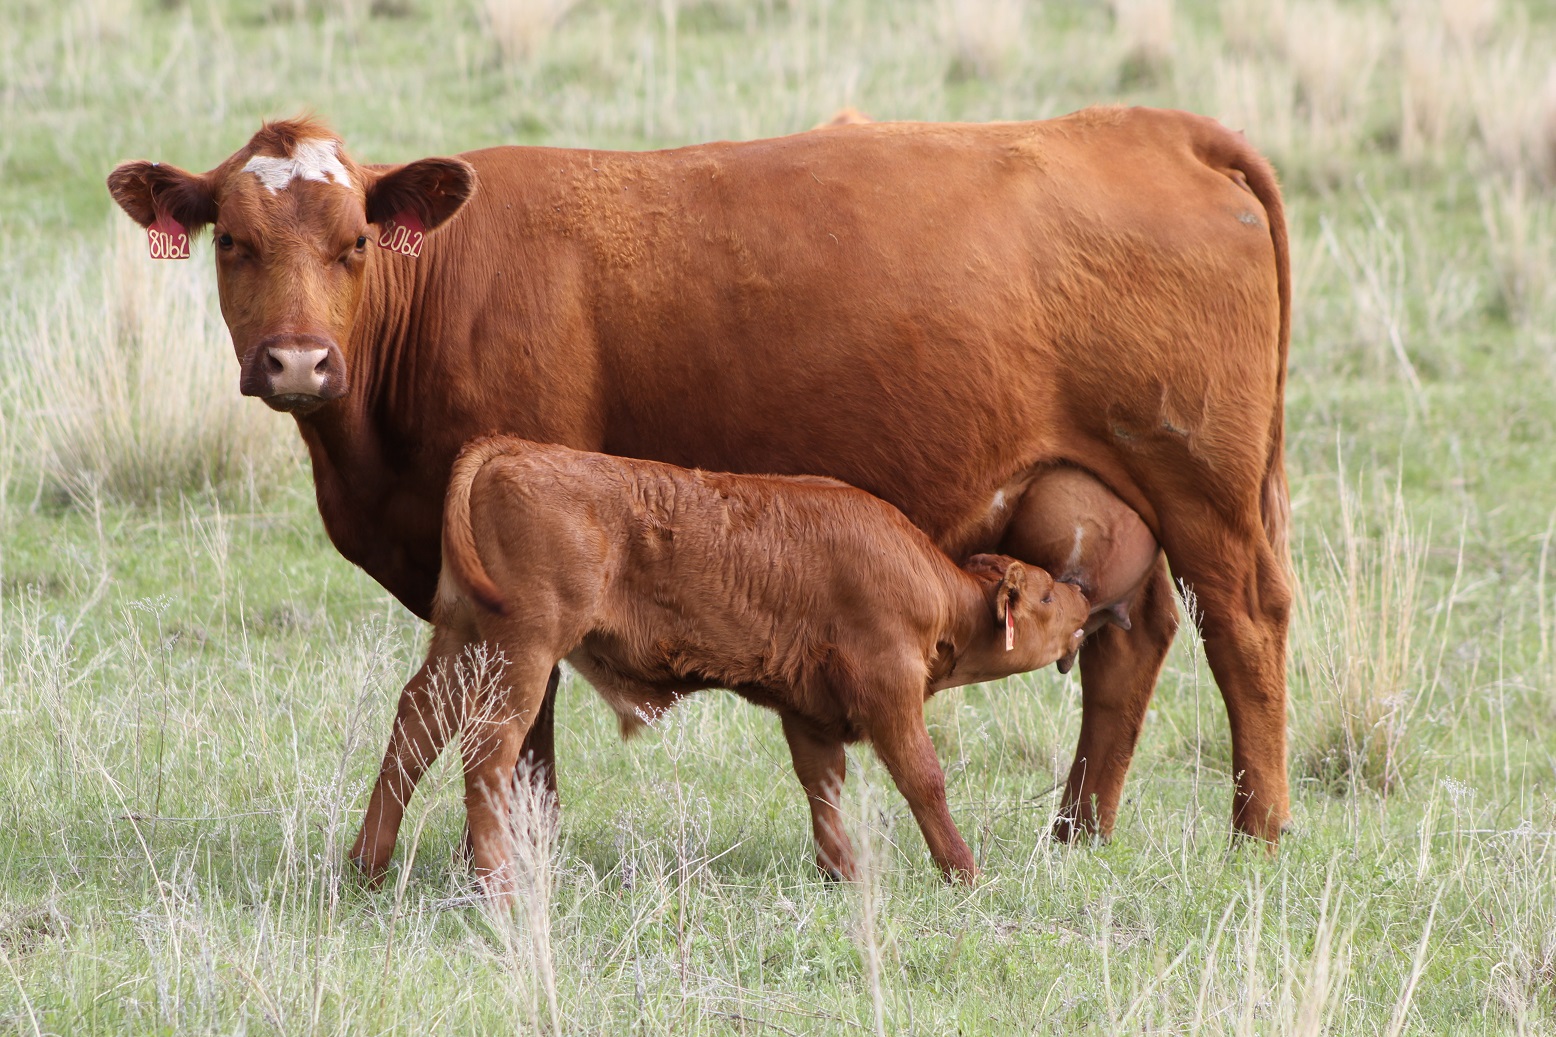 calf suckling from mother